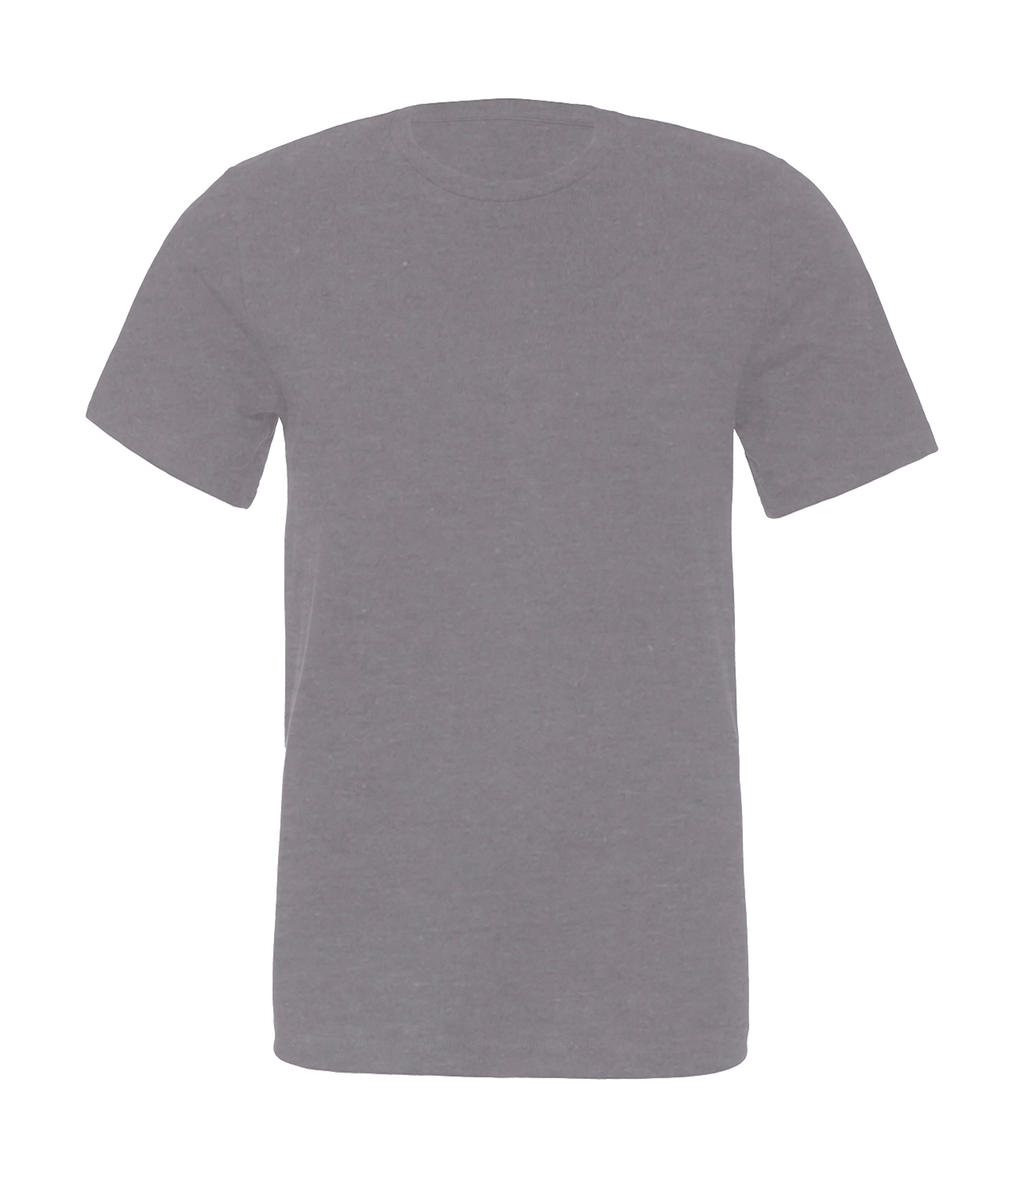  Unisex Jersey Short Sleeve Tee in Farbe Storm